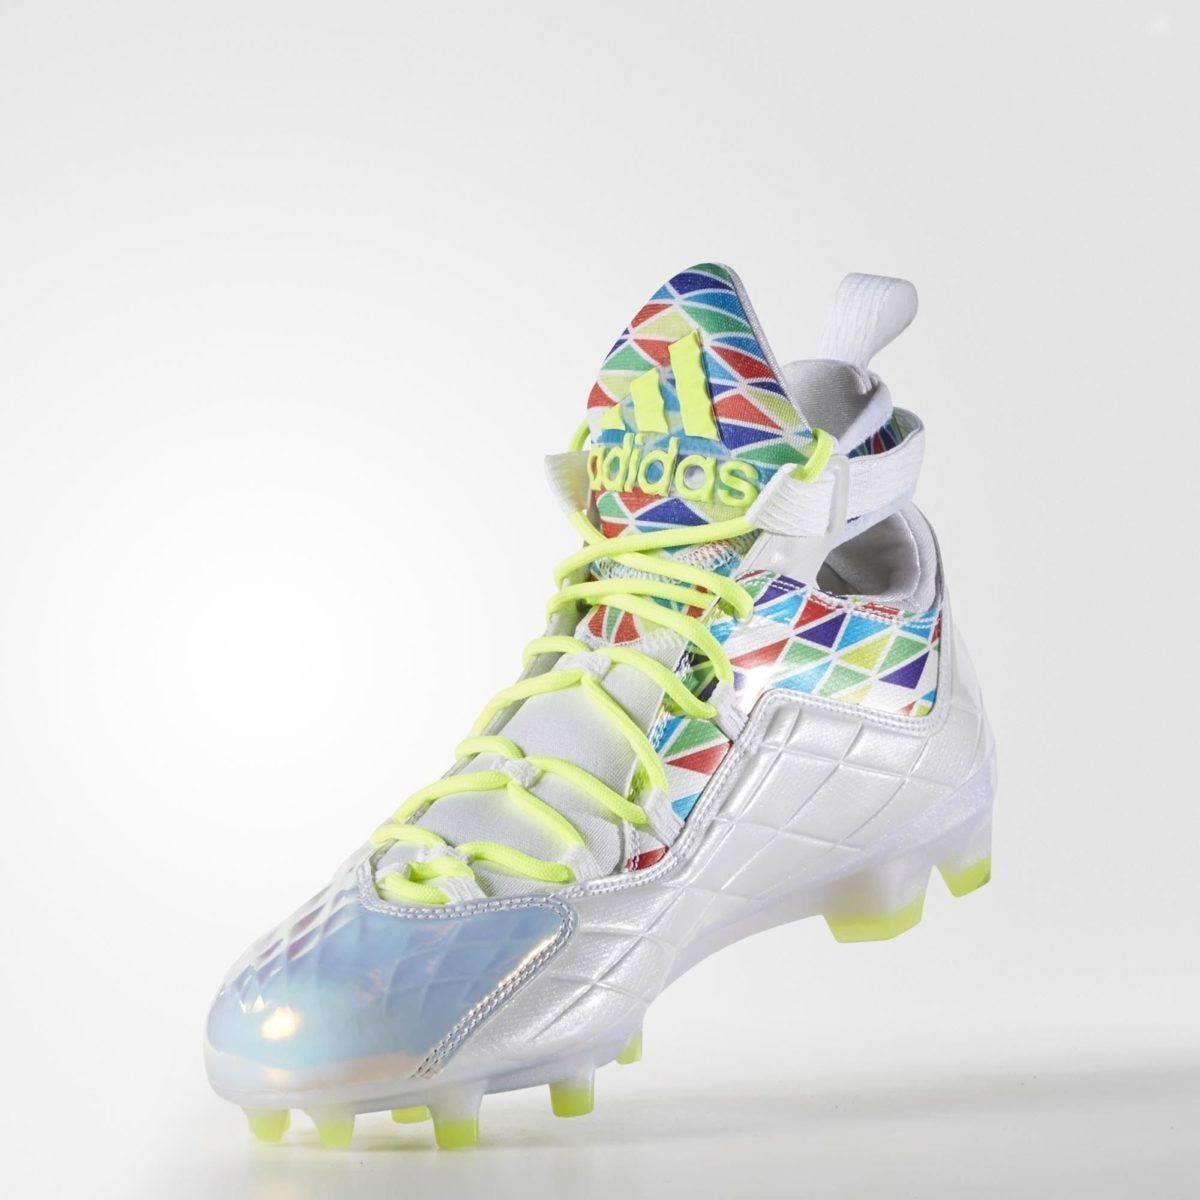 adidas womens lacrosse cleats